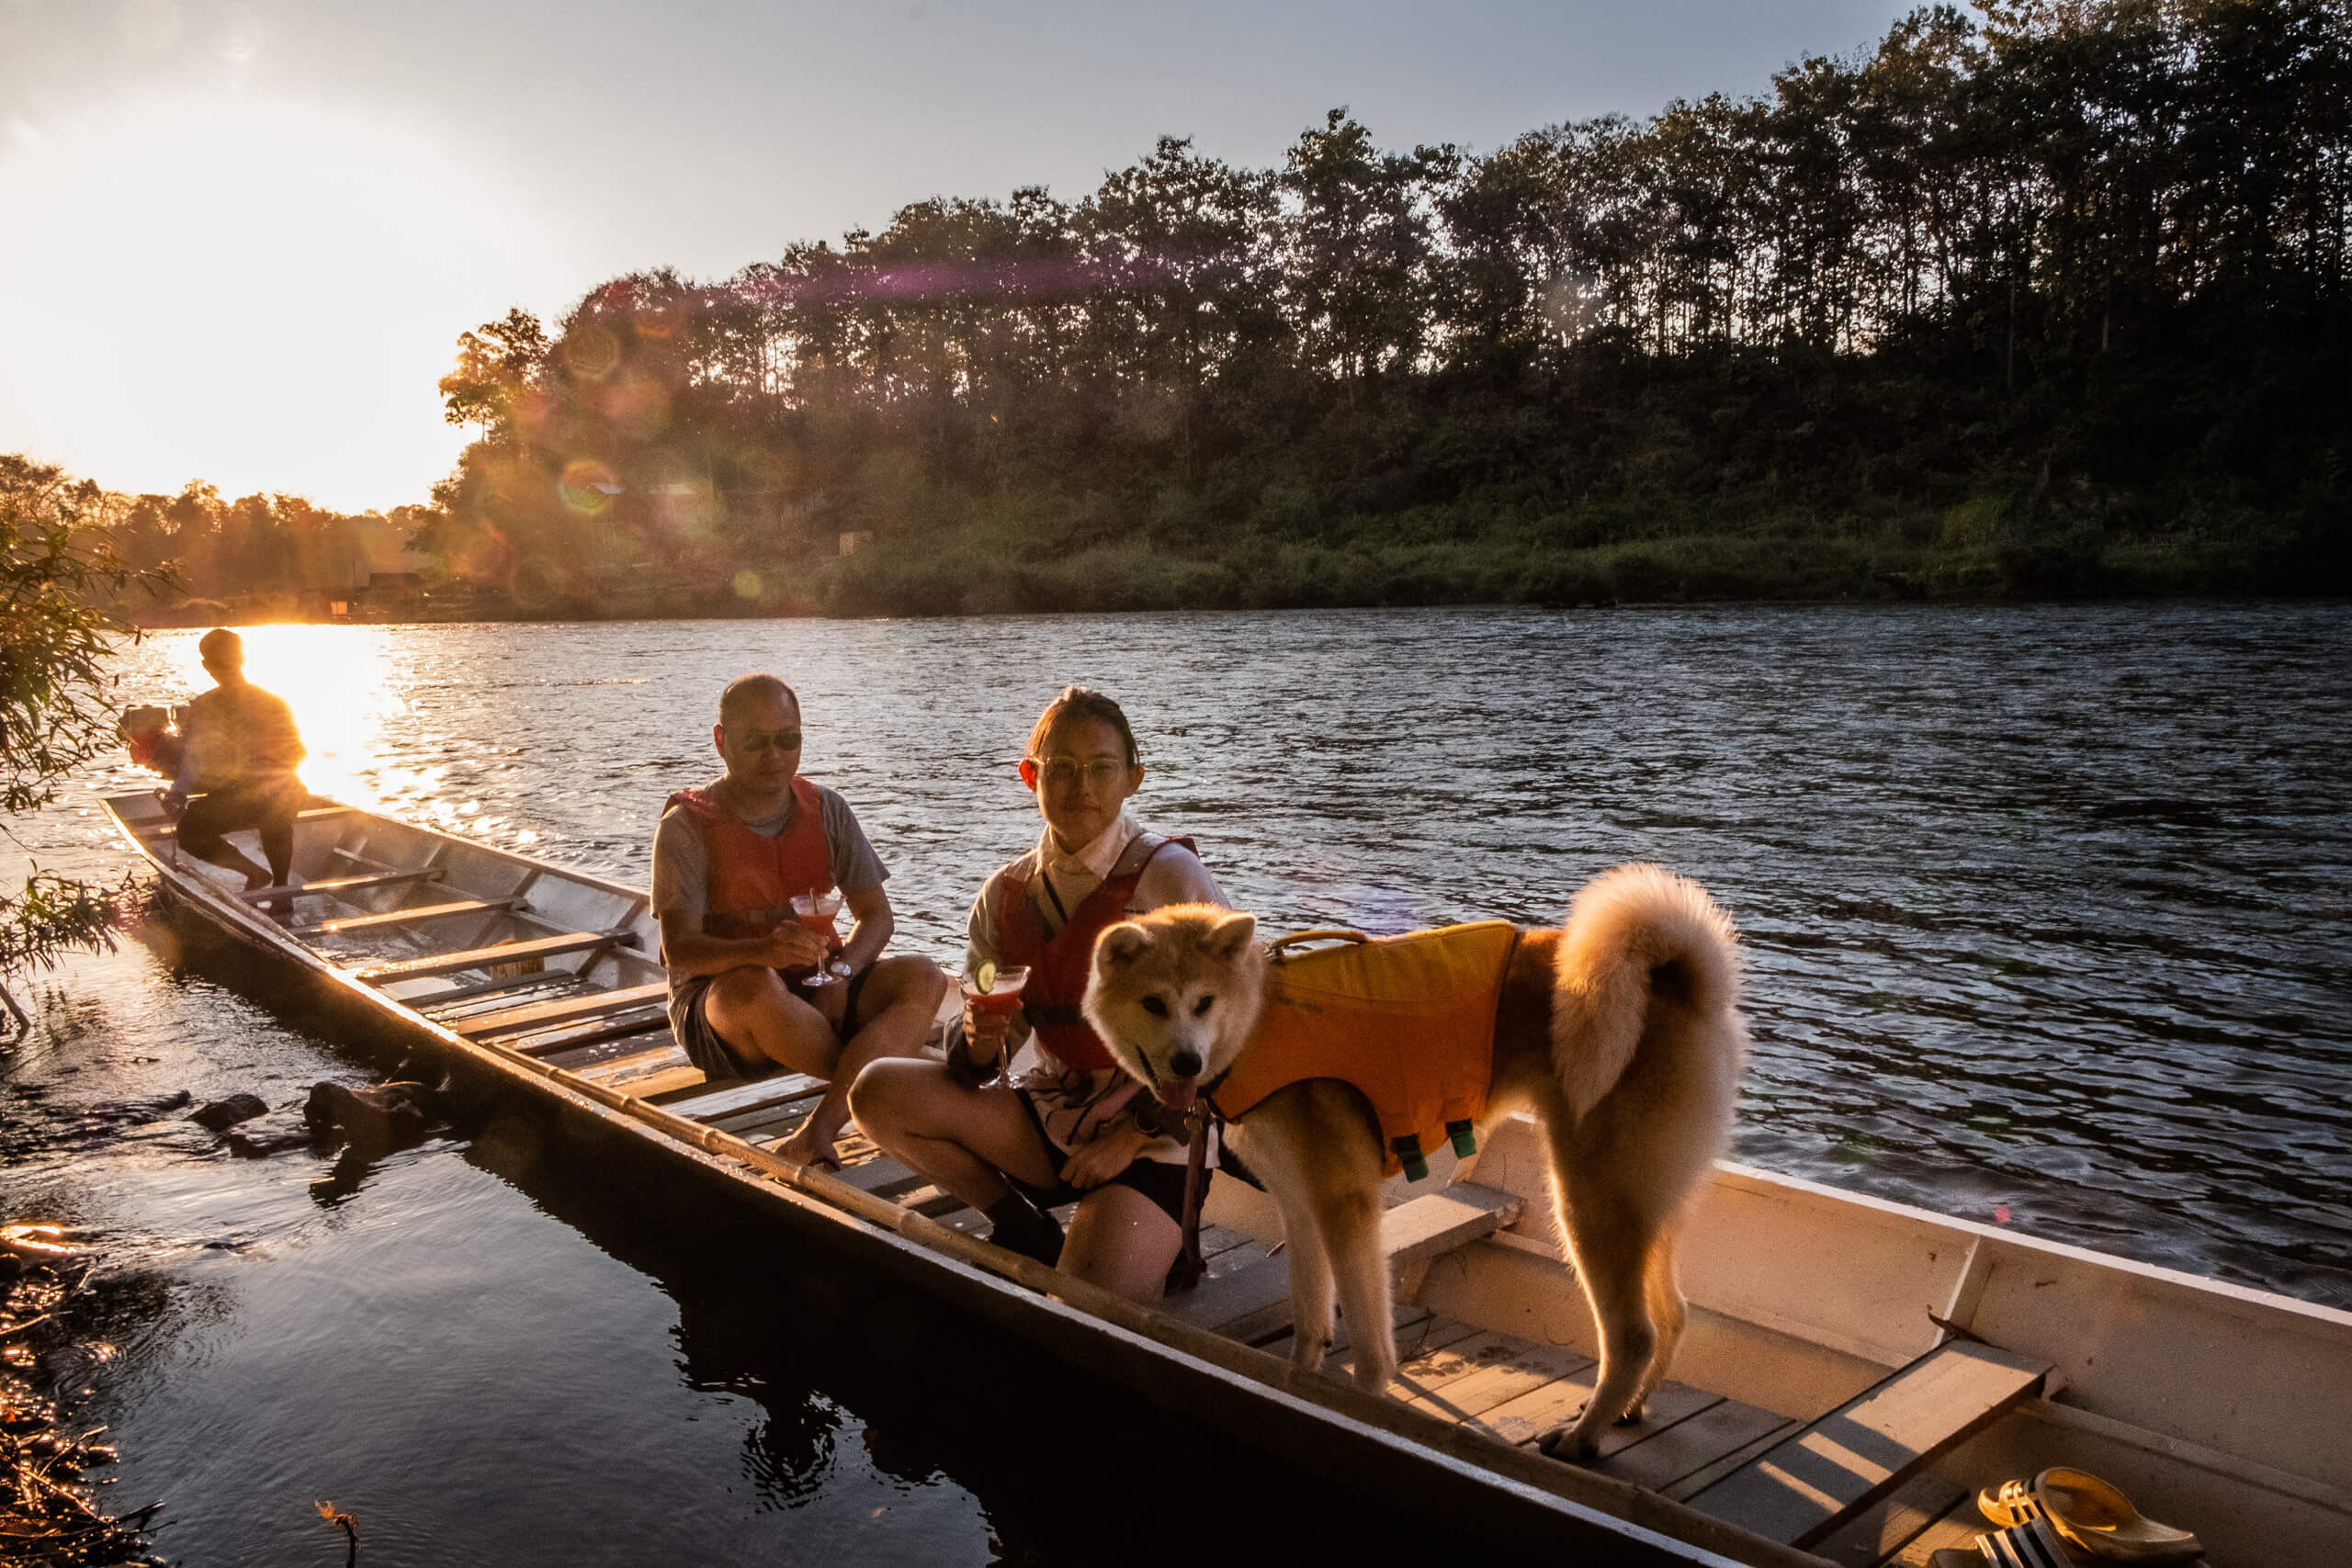 The Namkhan's sunset boat tour with 3 men and a dog in life vests